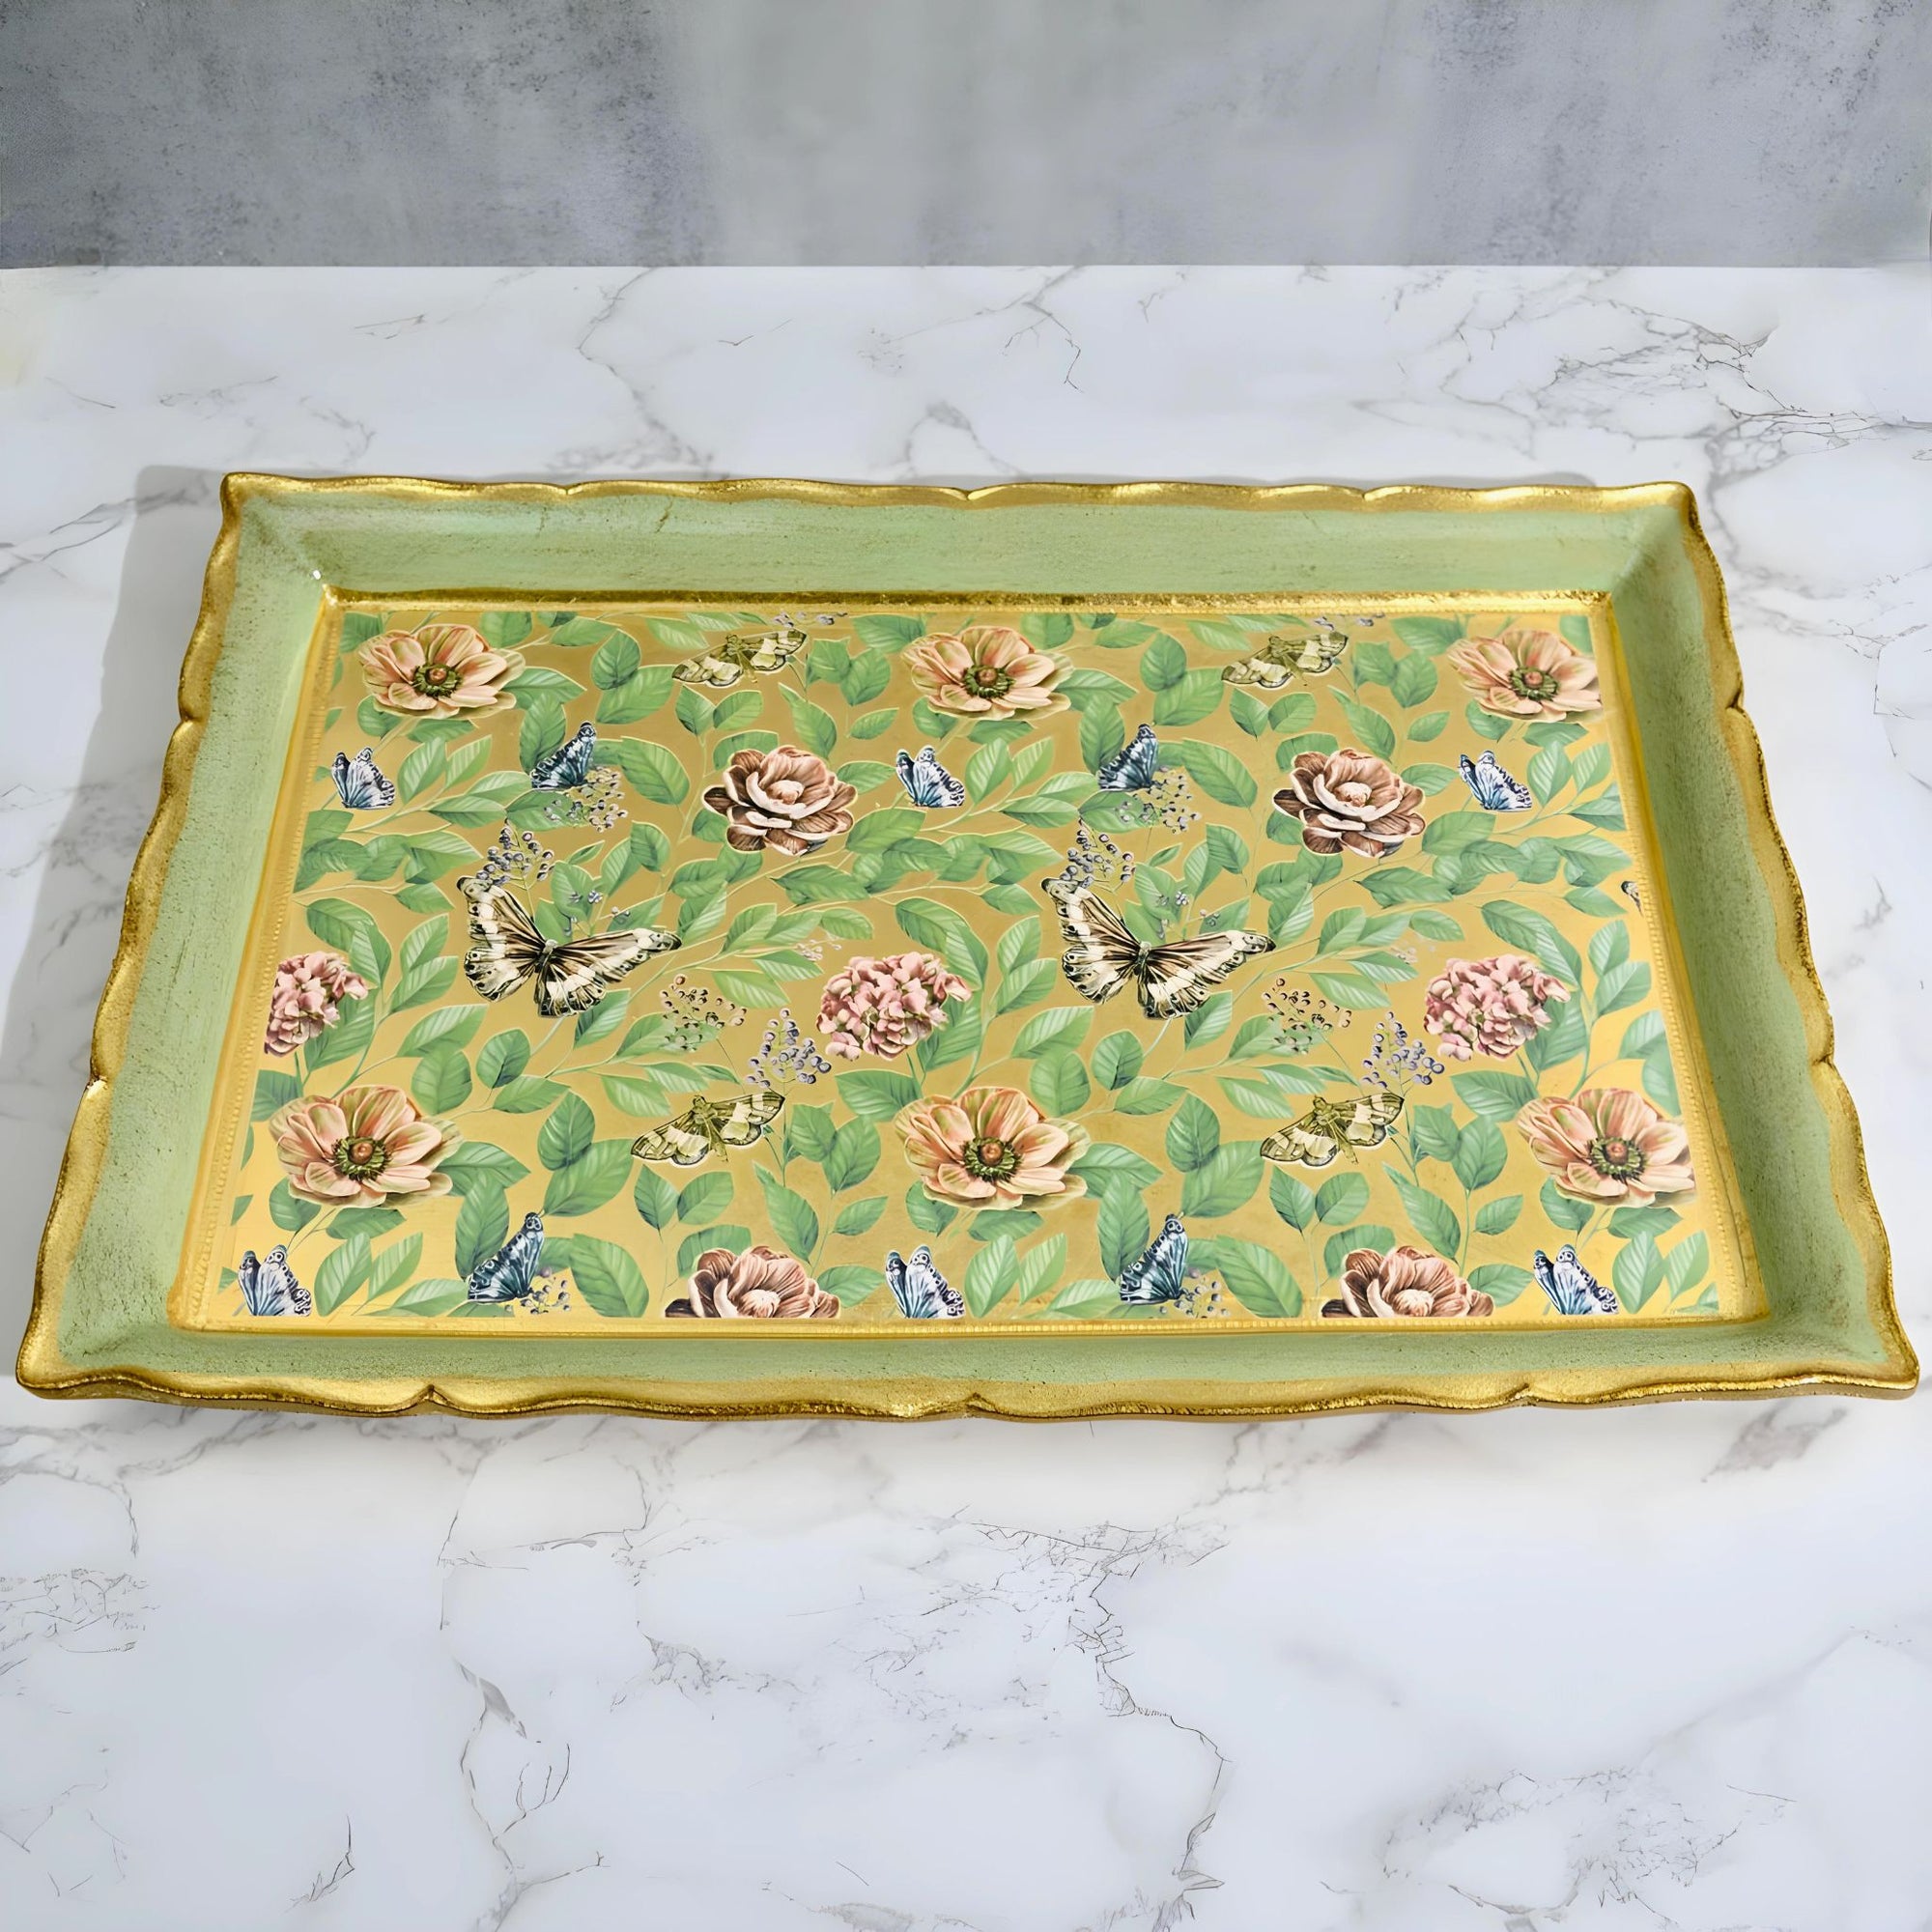 Florentine Carved Wood Decoupage Tray, Floral & Butterflies - My Italian Decor